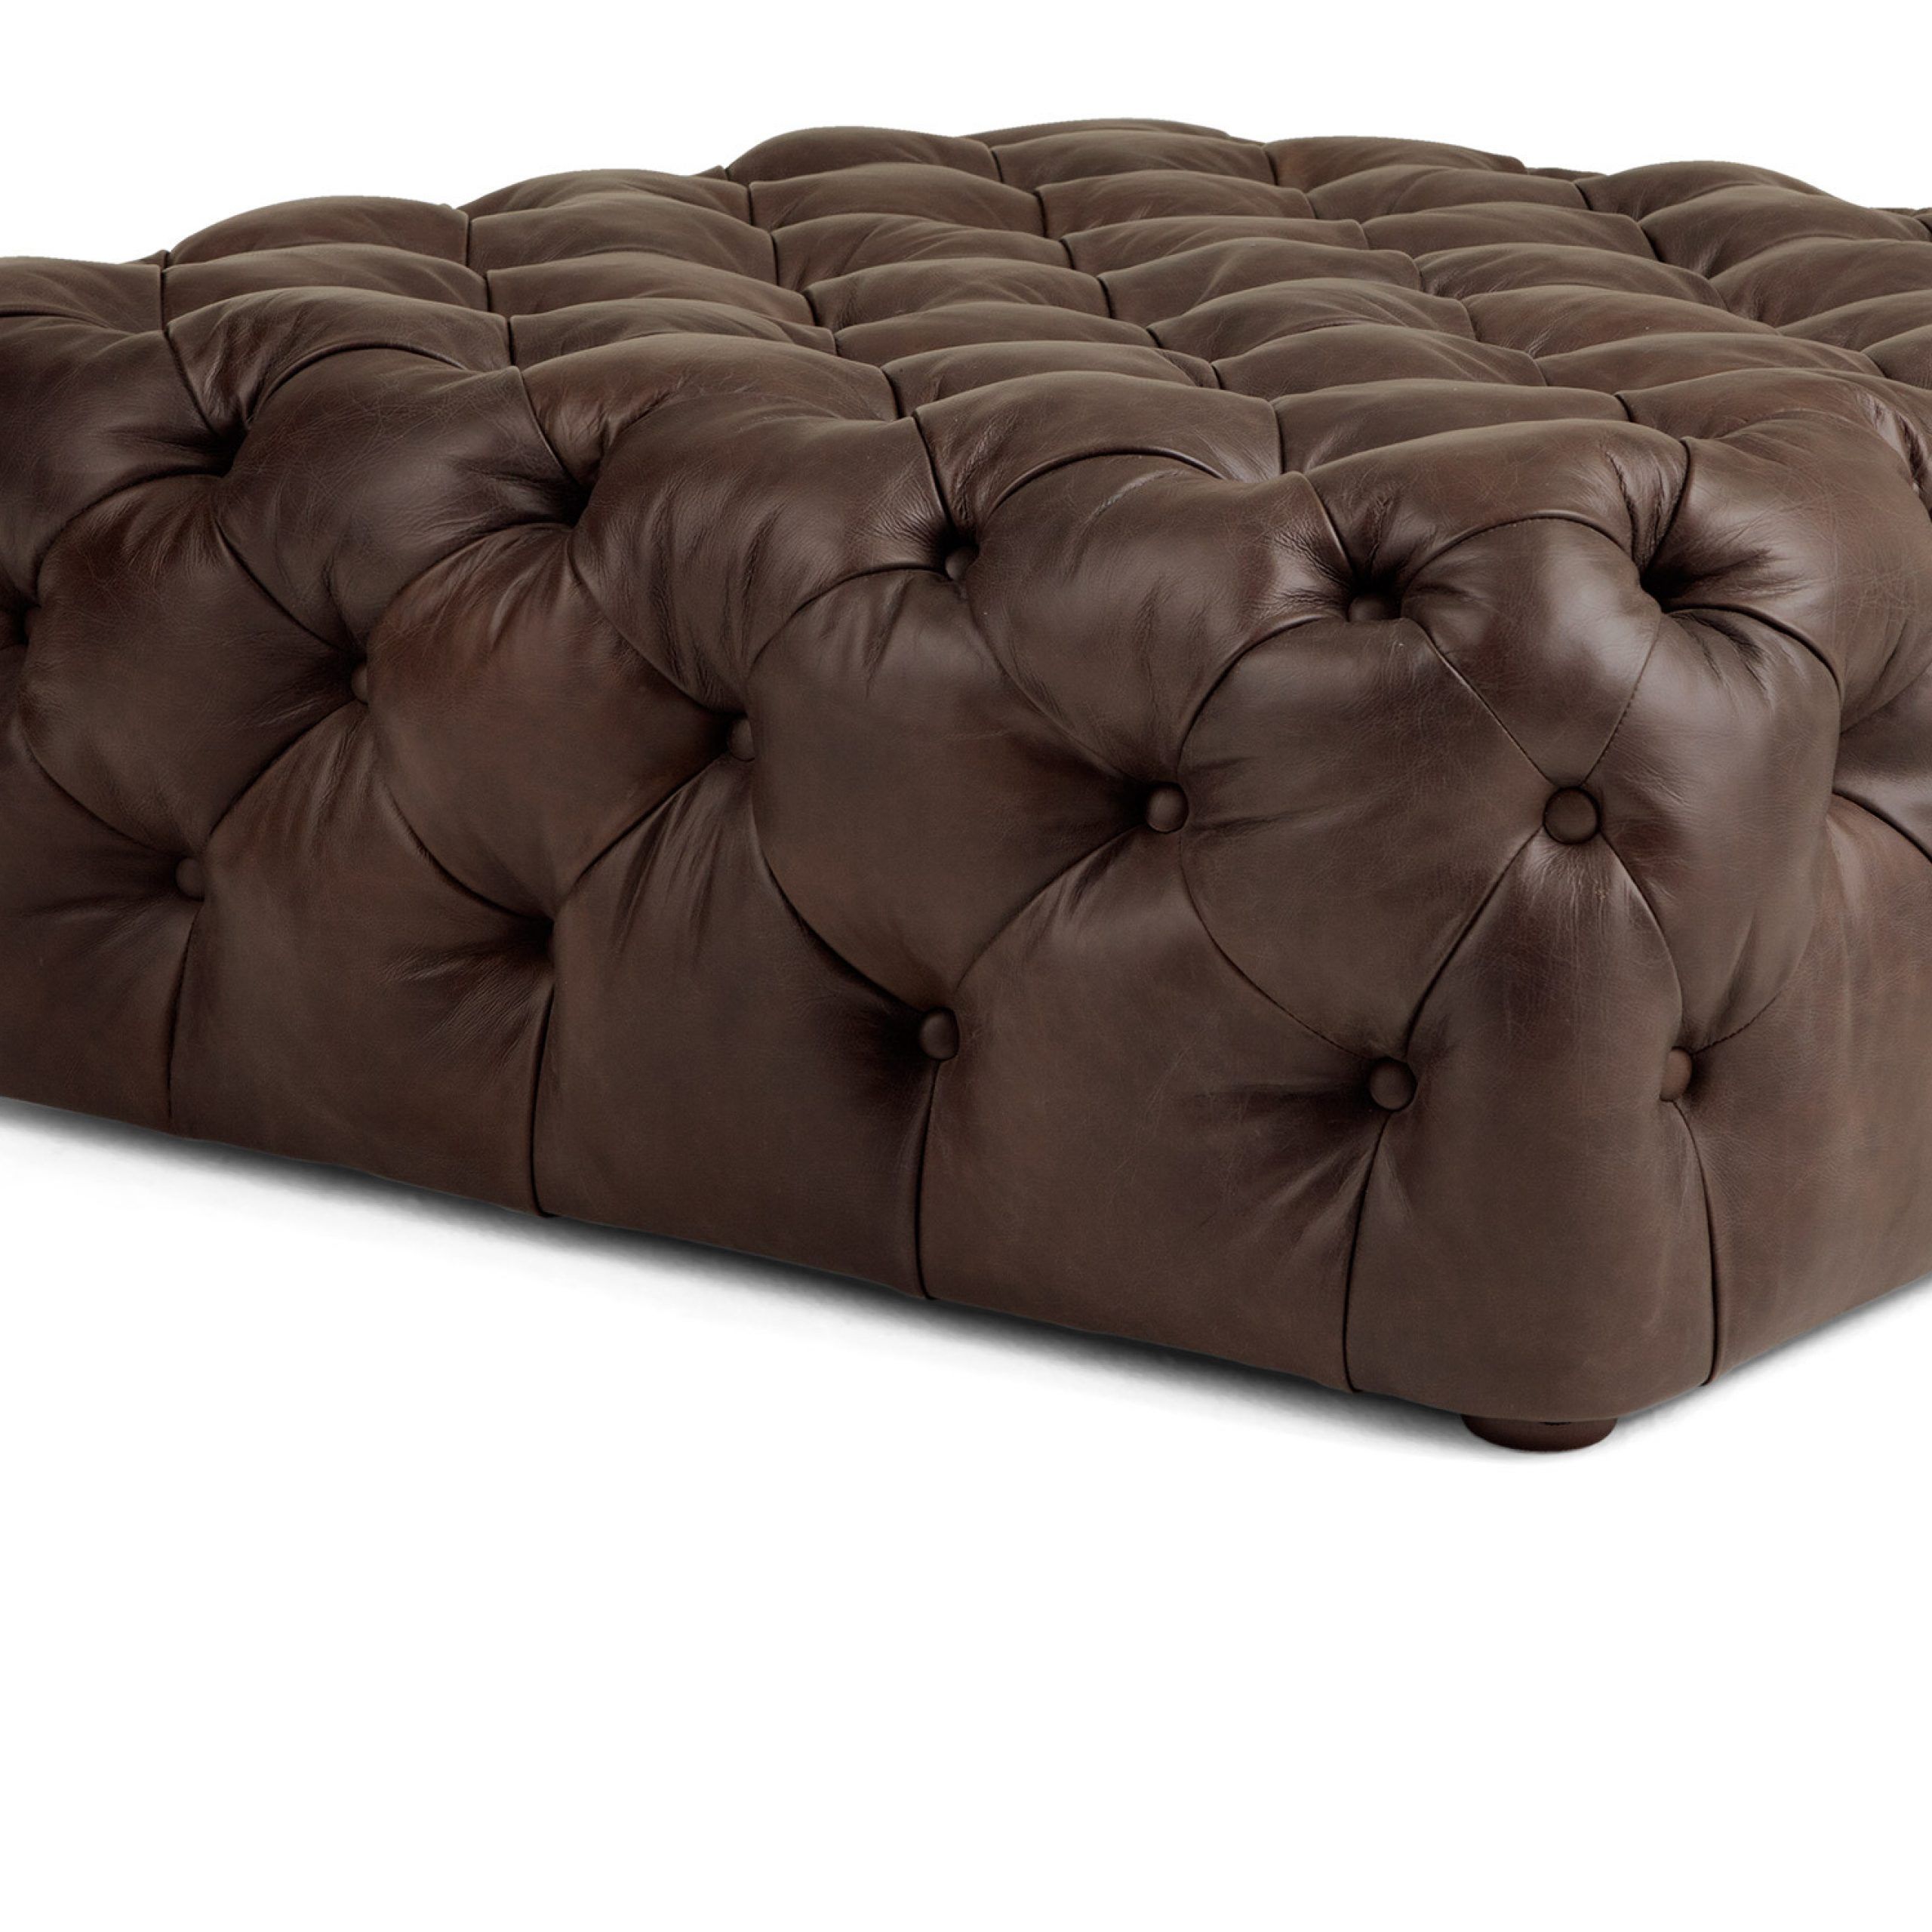 Scott Large Square Ottoman In Brown Premium Leather | Made With Regard To Brown Leather Square Pouf Ottomans (View 10 of 20)